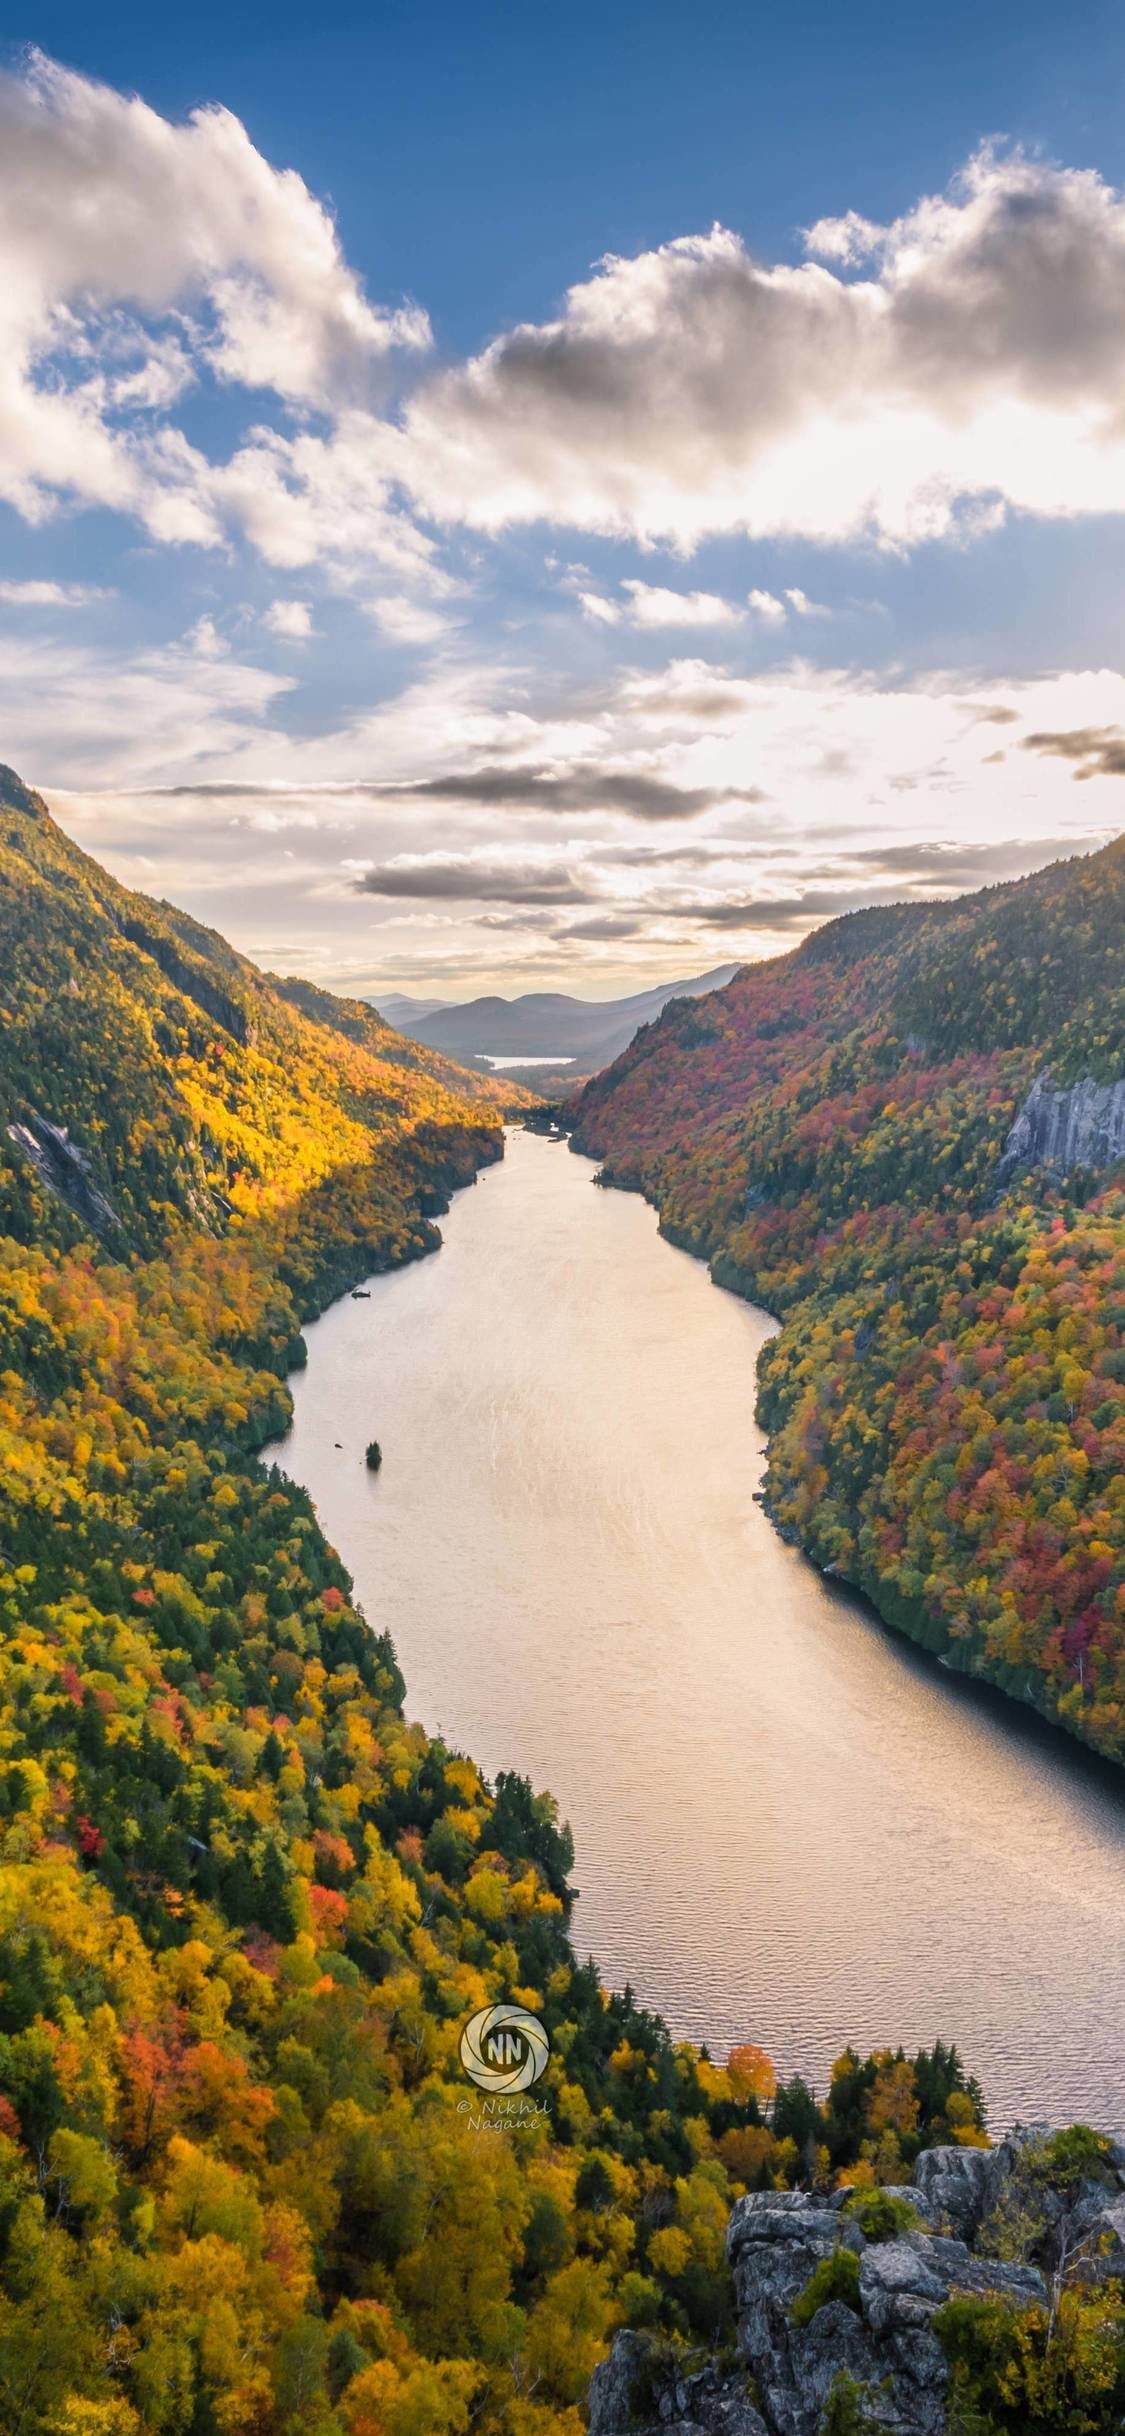 1125x2436 Adirondack Mountains River Clouds Trees 5k (Iphone XS,Iphone 10,Iphone X)